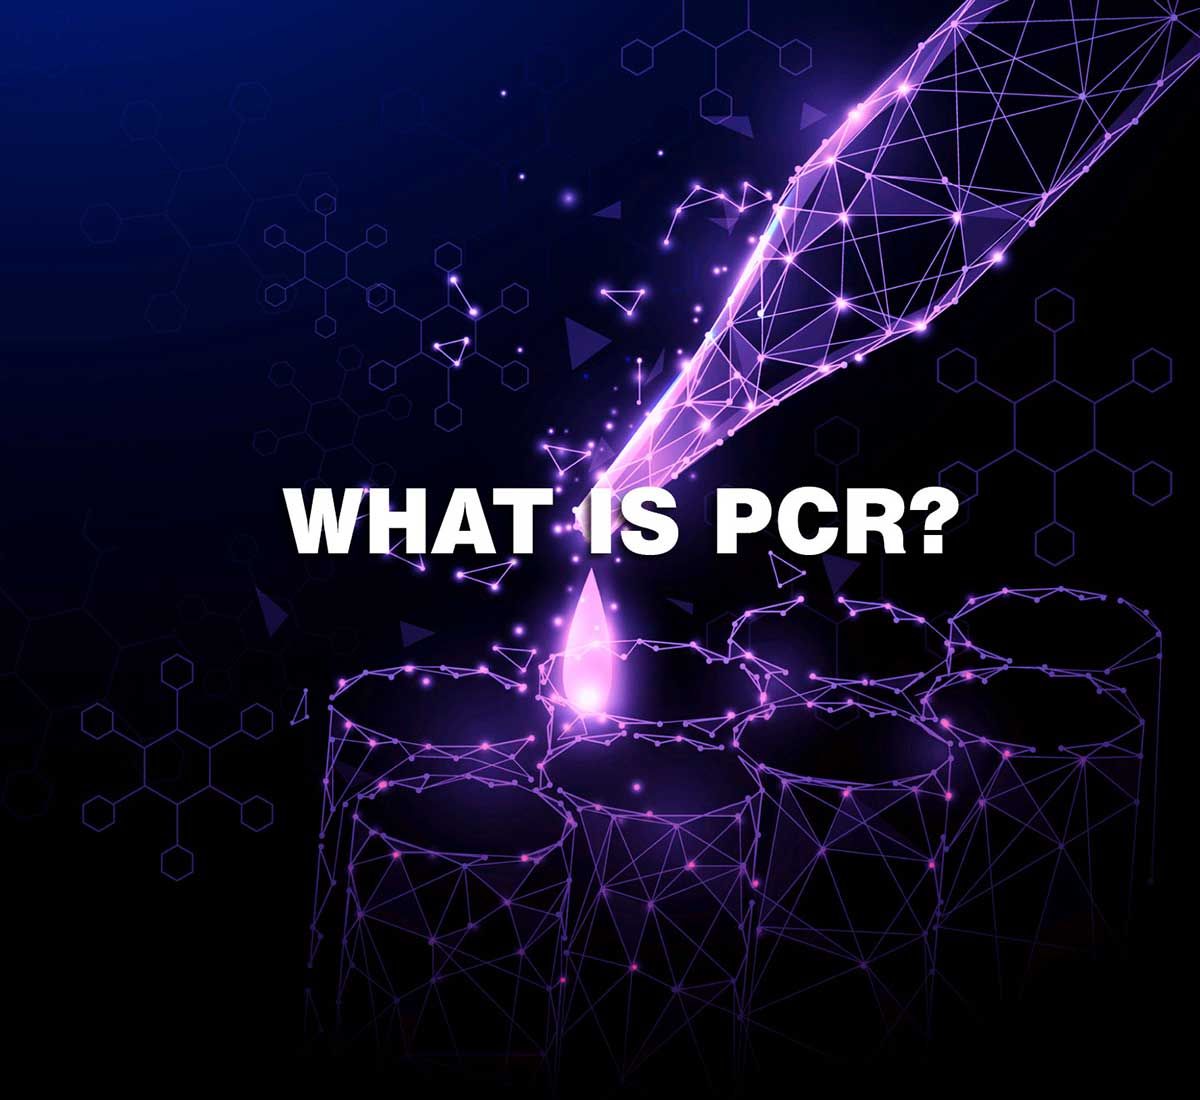 What is PCR?